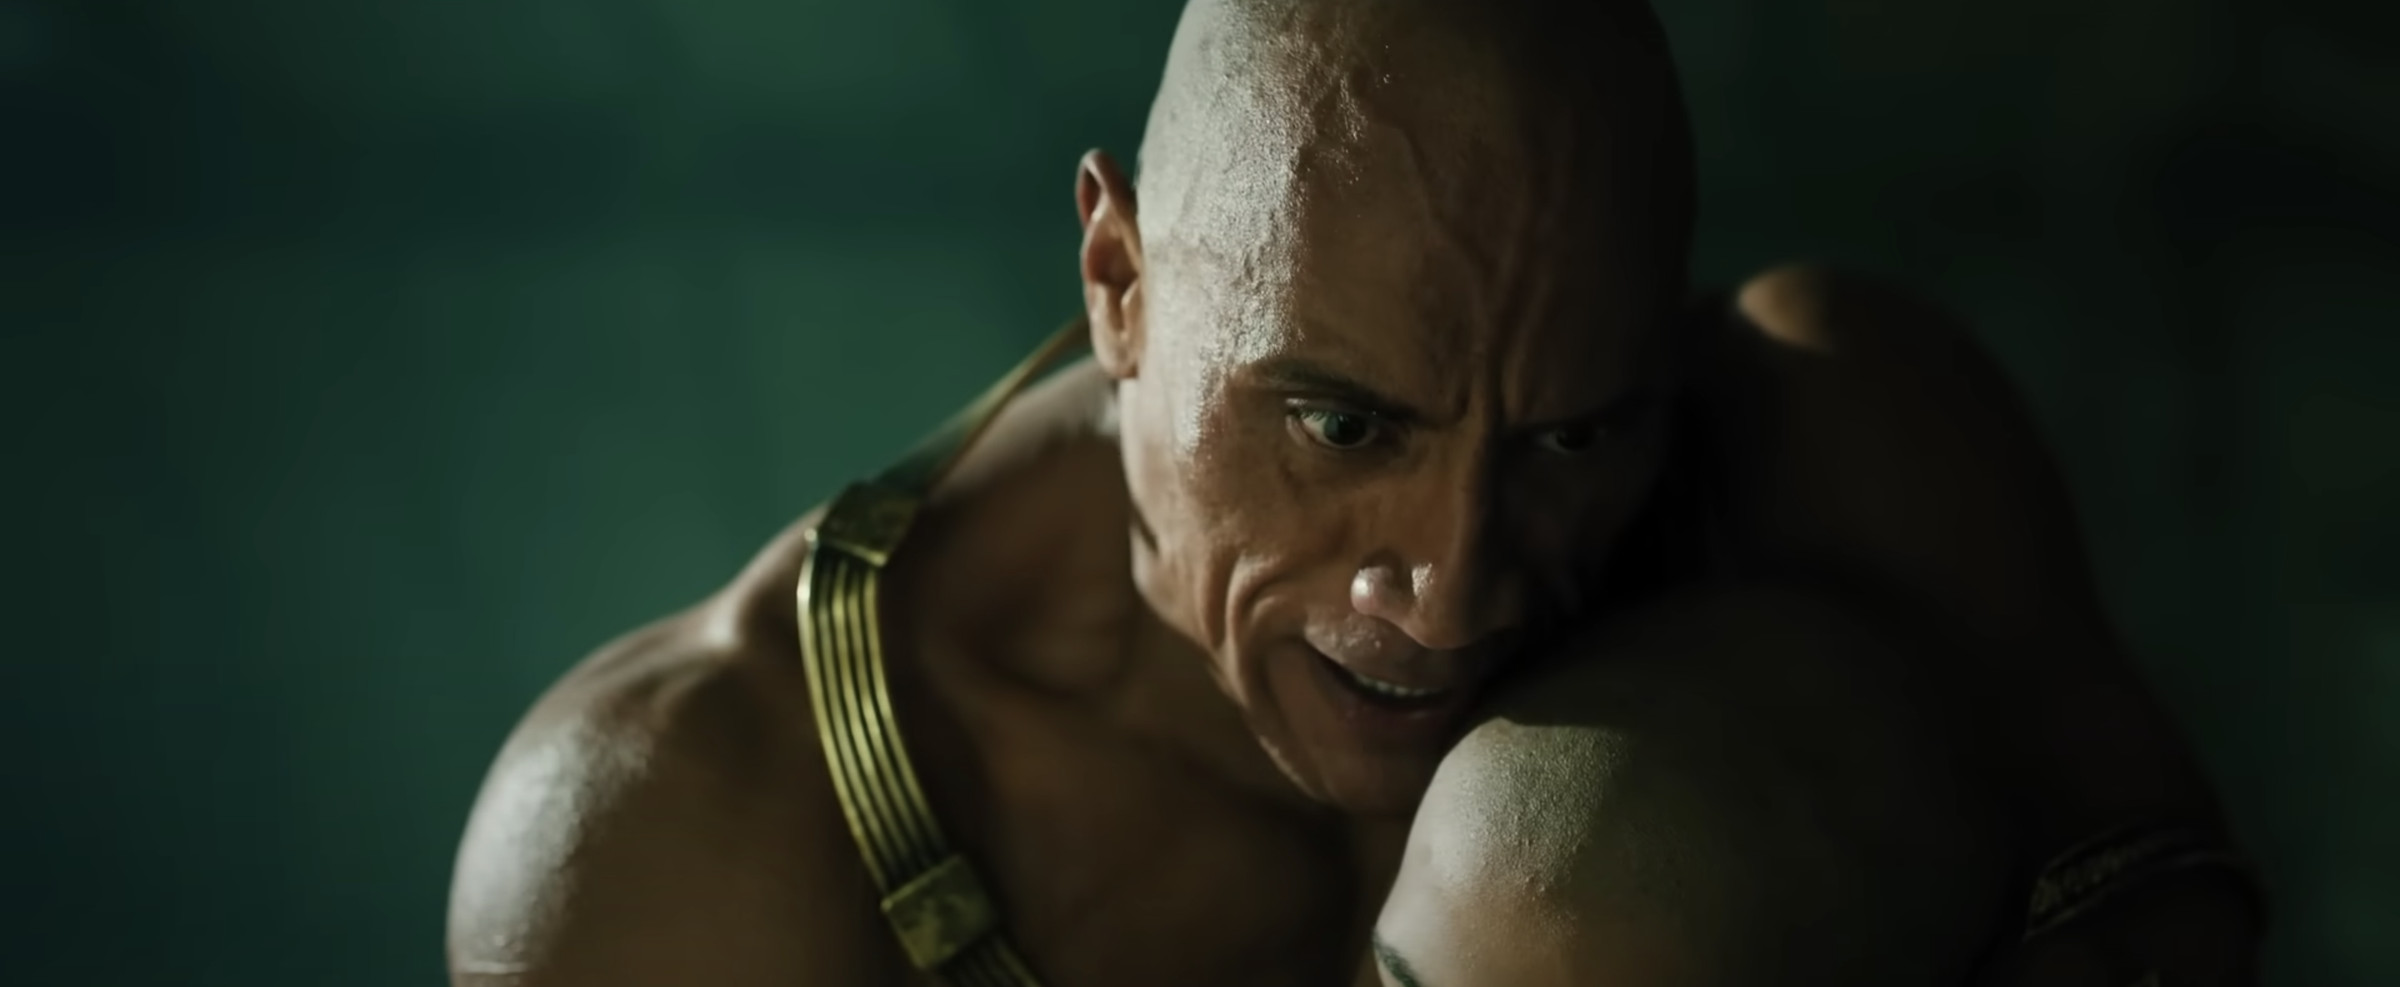 A muscular bald man wearing a humongous golden necklace and embracing his son, who is also bald and dying.